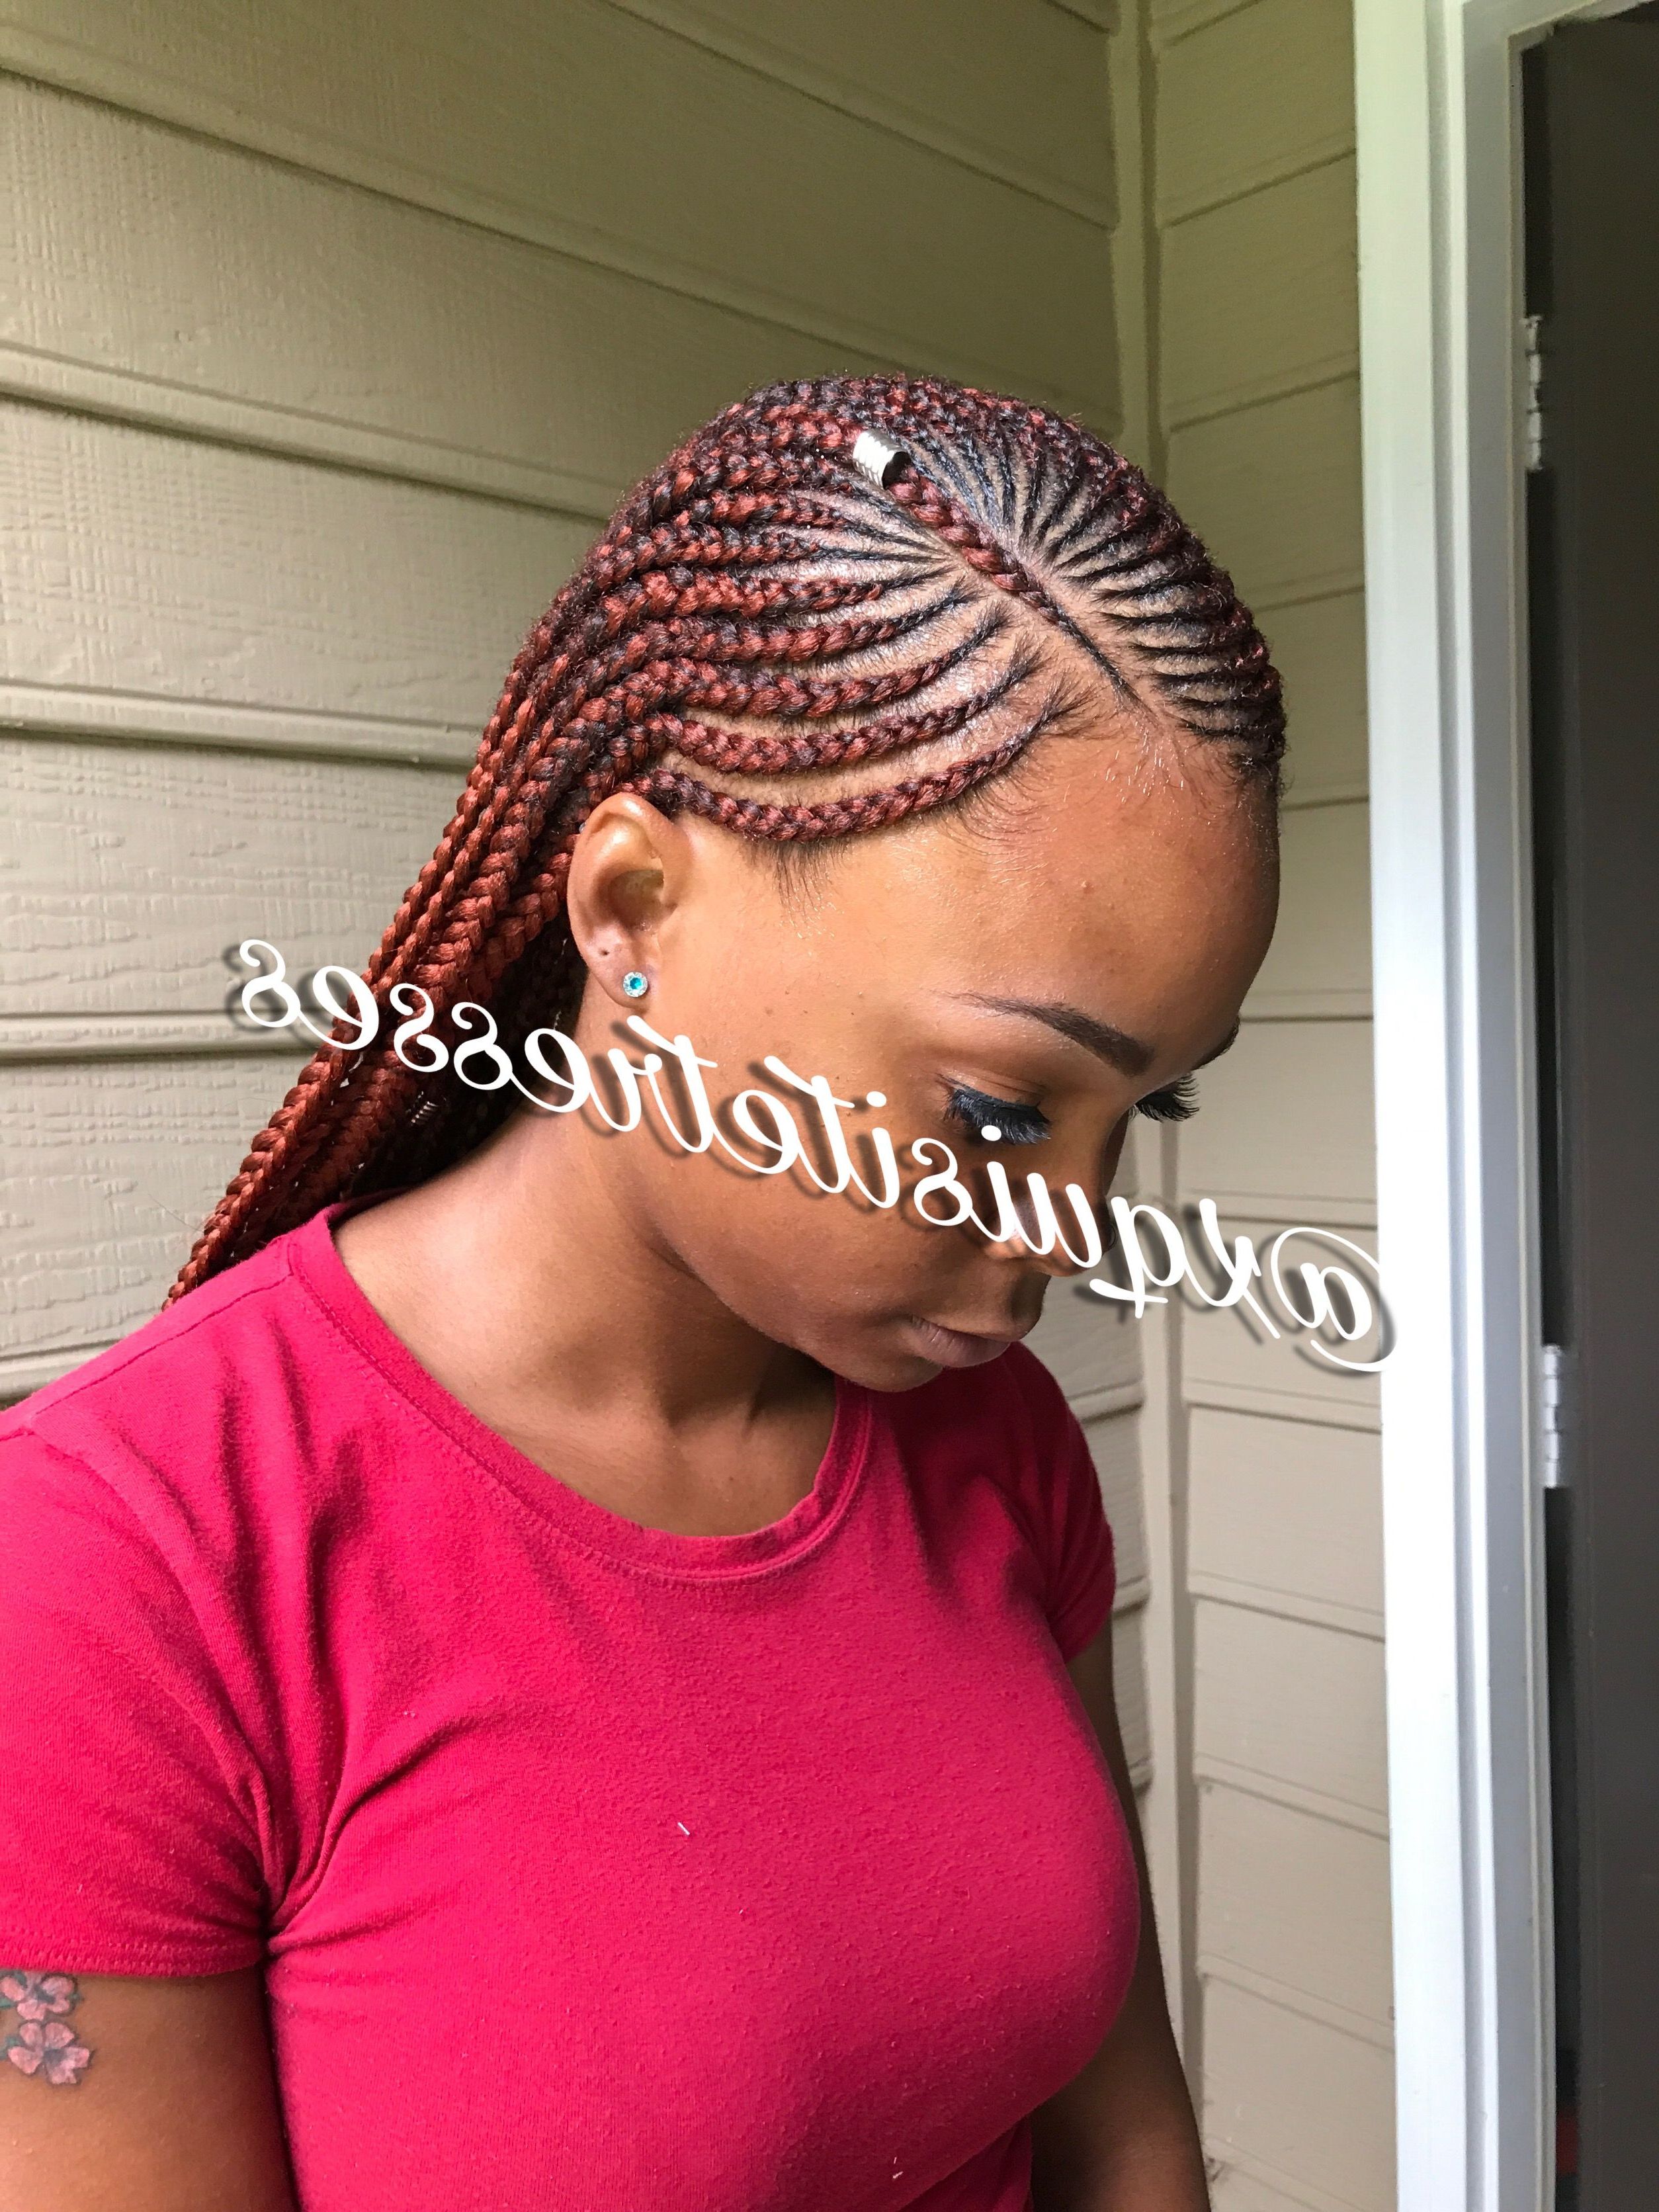 Well Liked Tight Black Swirling Under Braid Hairstyles In Tribal Feed In Braids Follow On Ig @xquisitetresses (View 20 of 20)